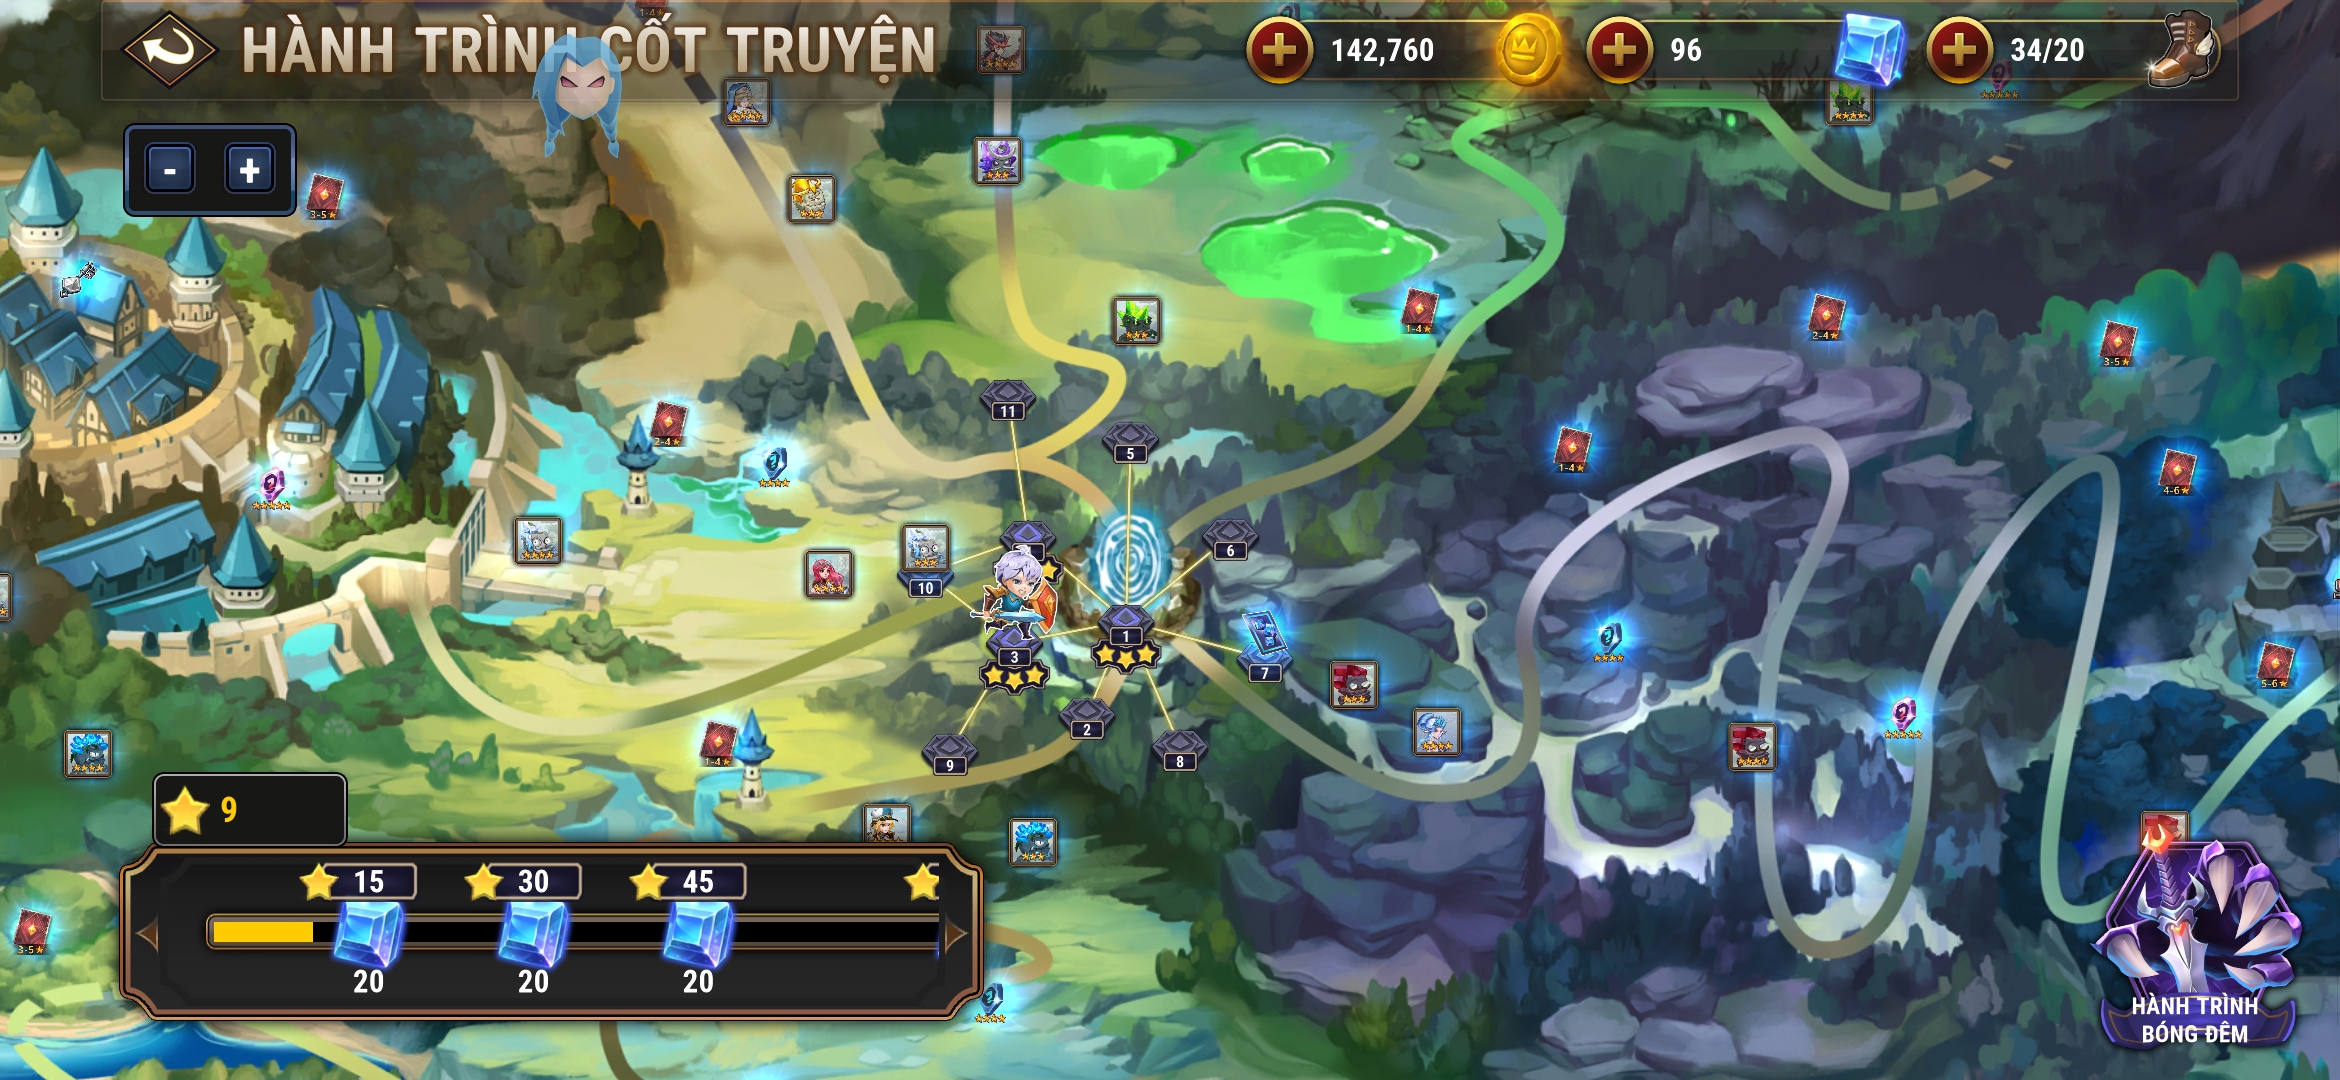 [Game Android] Fantasy League: Turn-based RPG Tiếng Việt